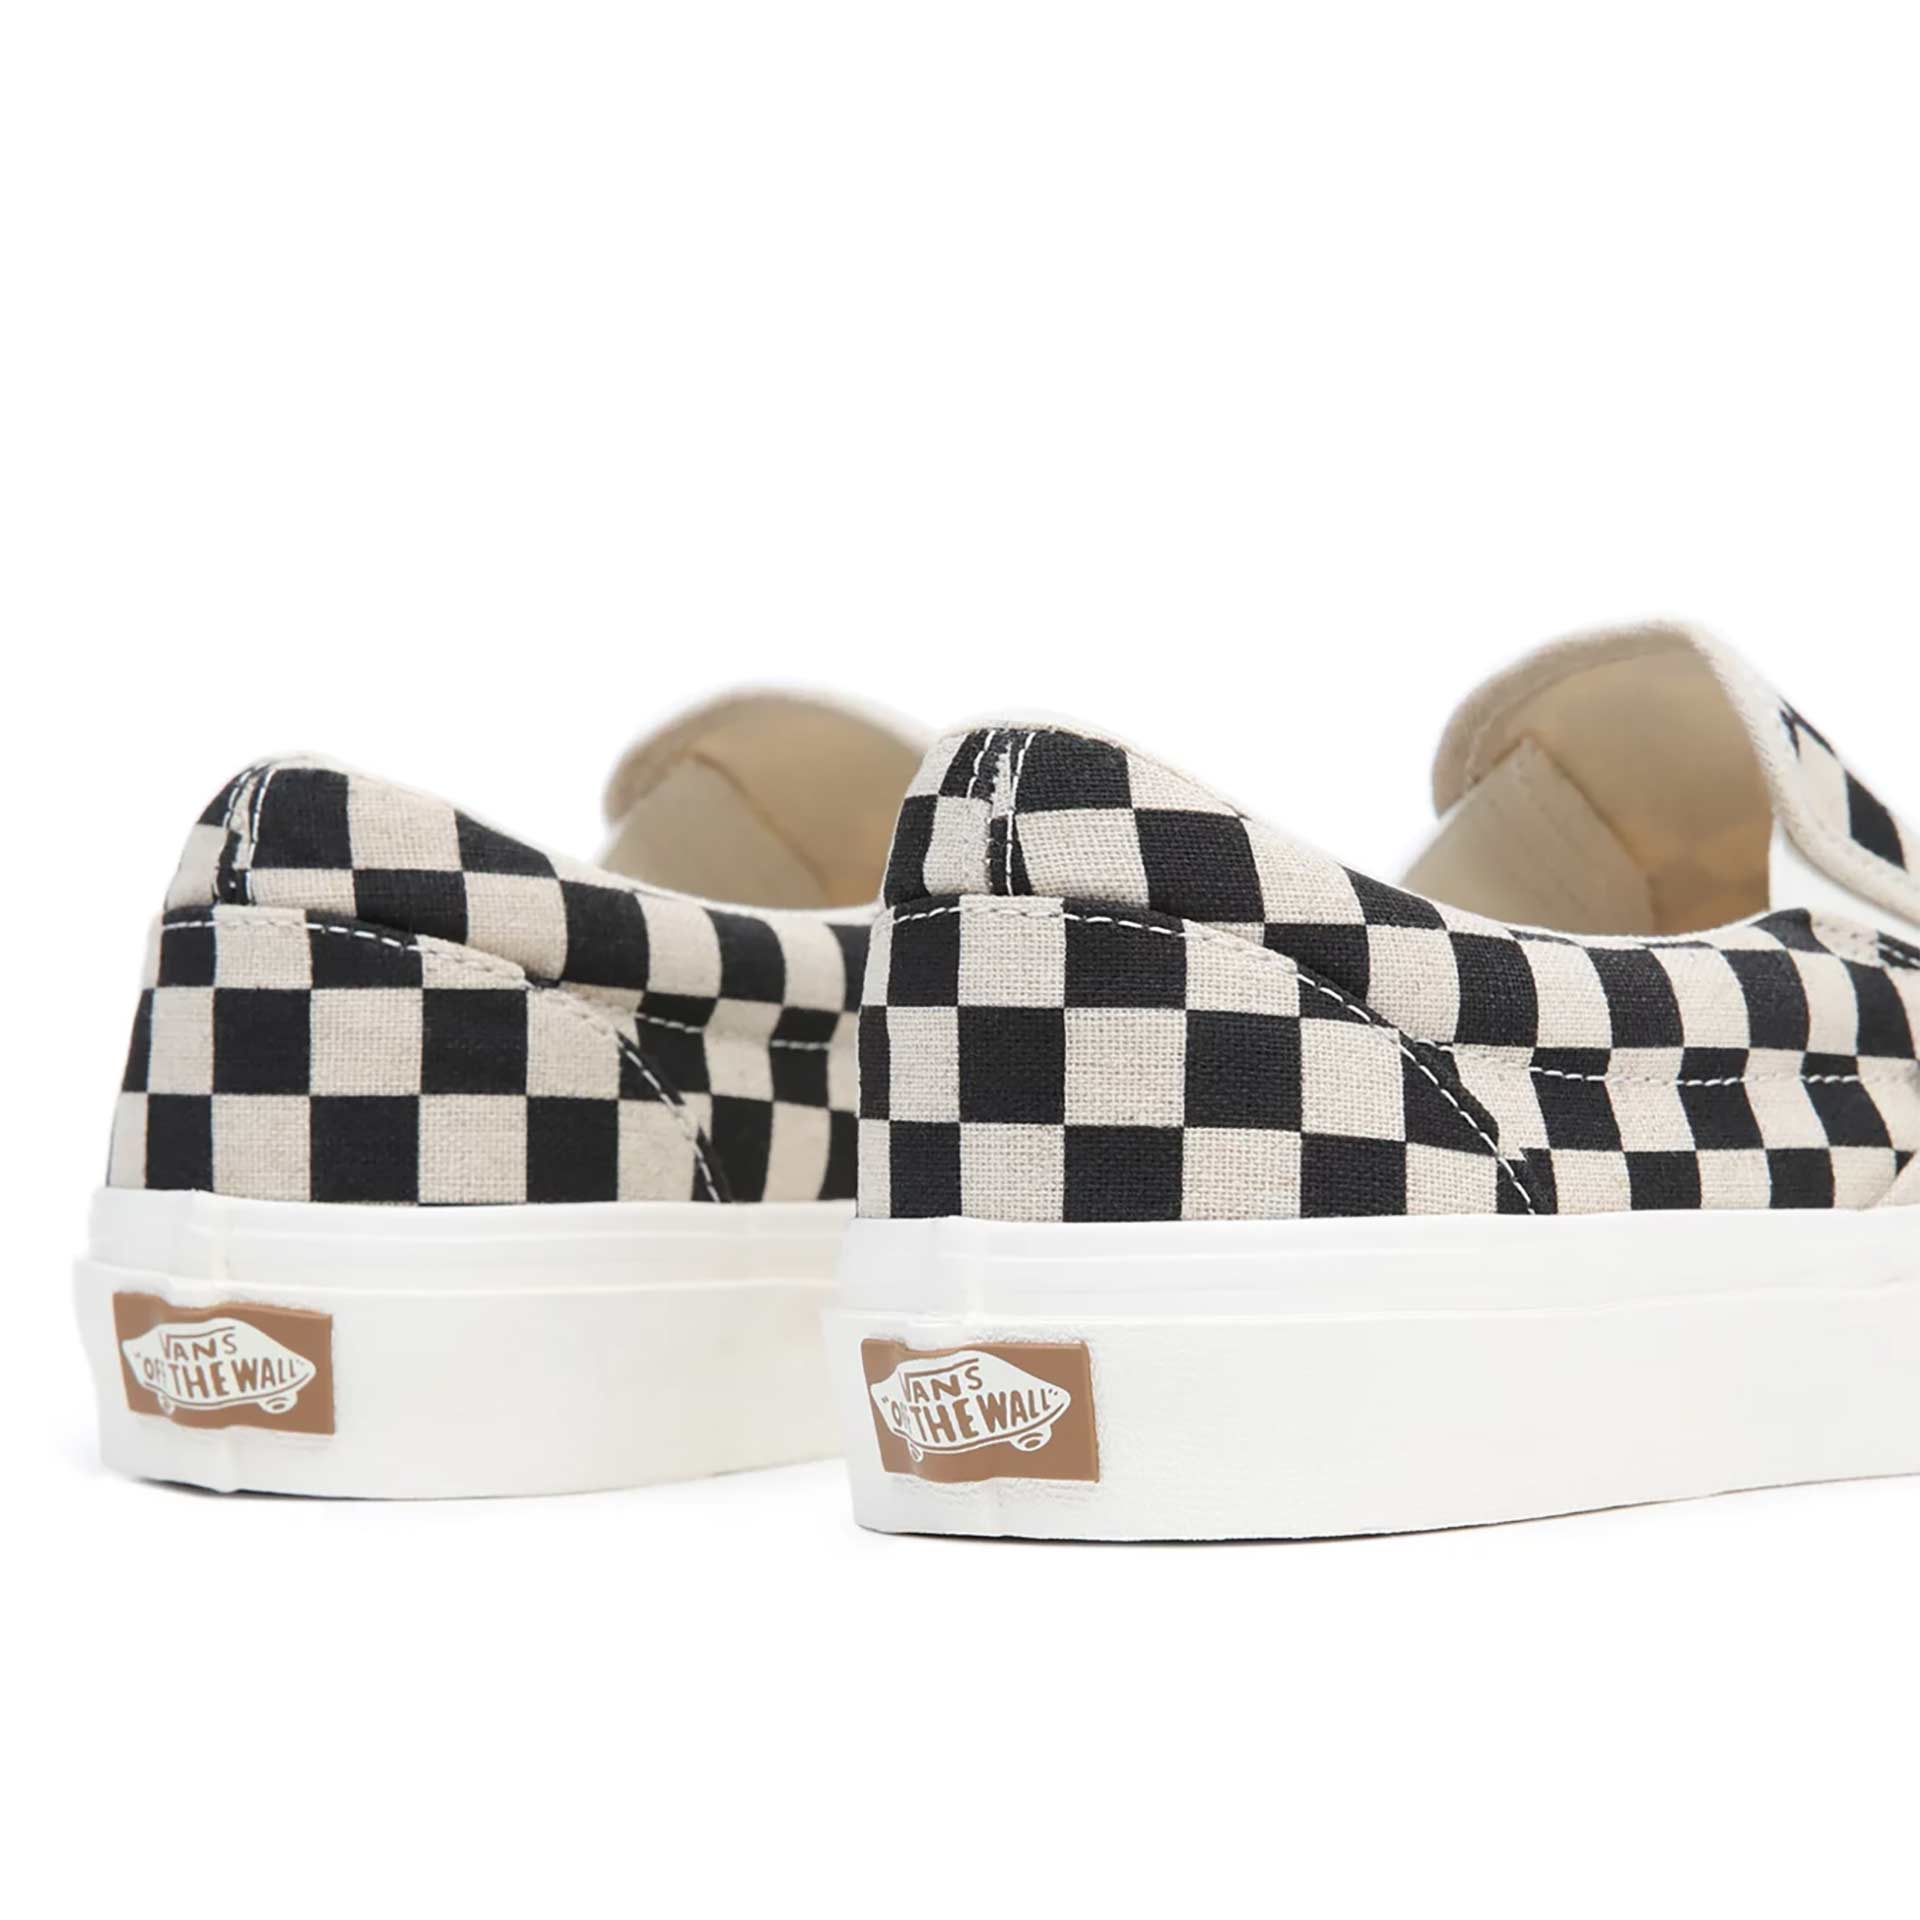 Vans Classic Slip-On Eco Theory Checkerboard Black/White 05